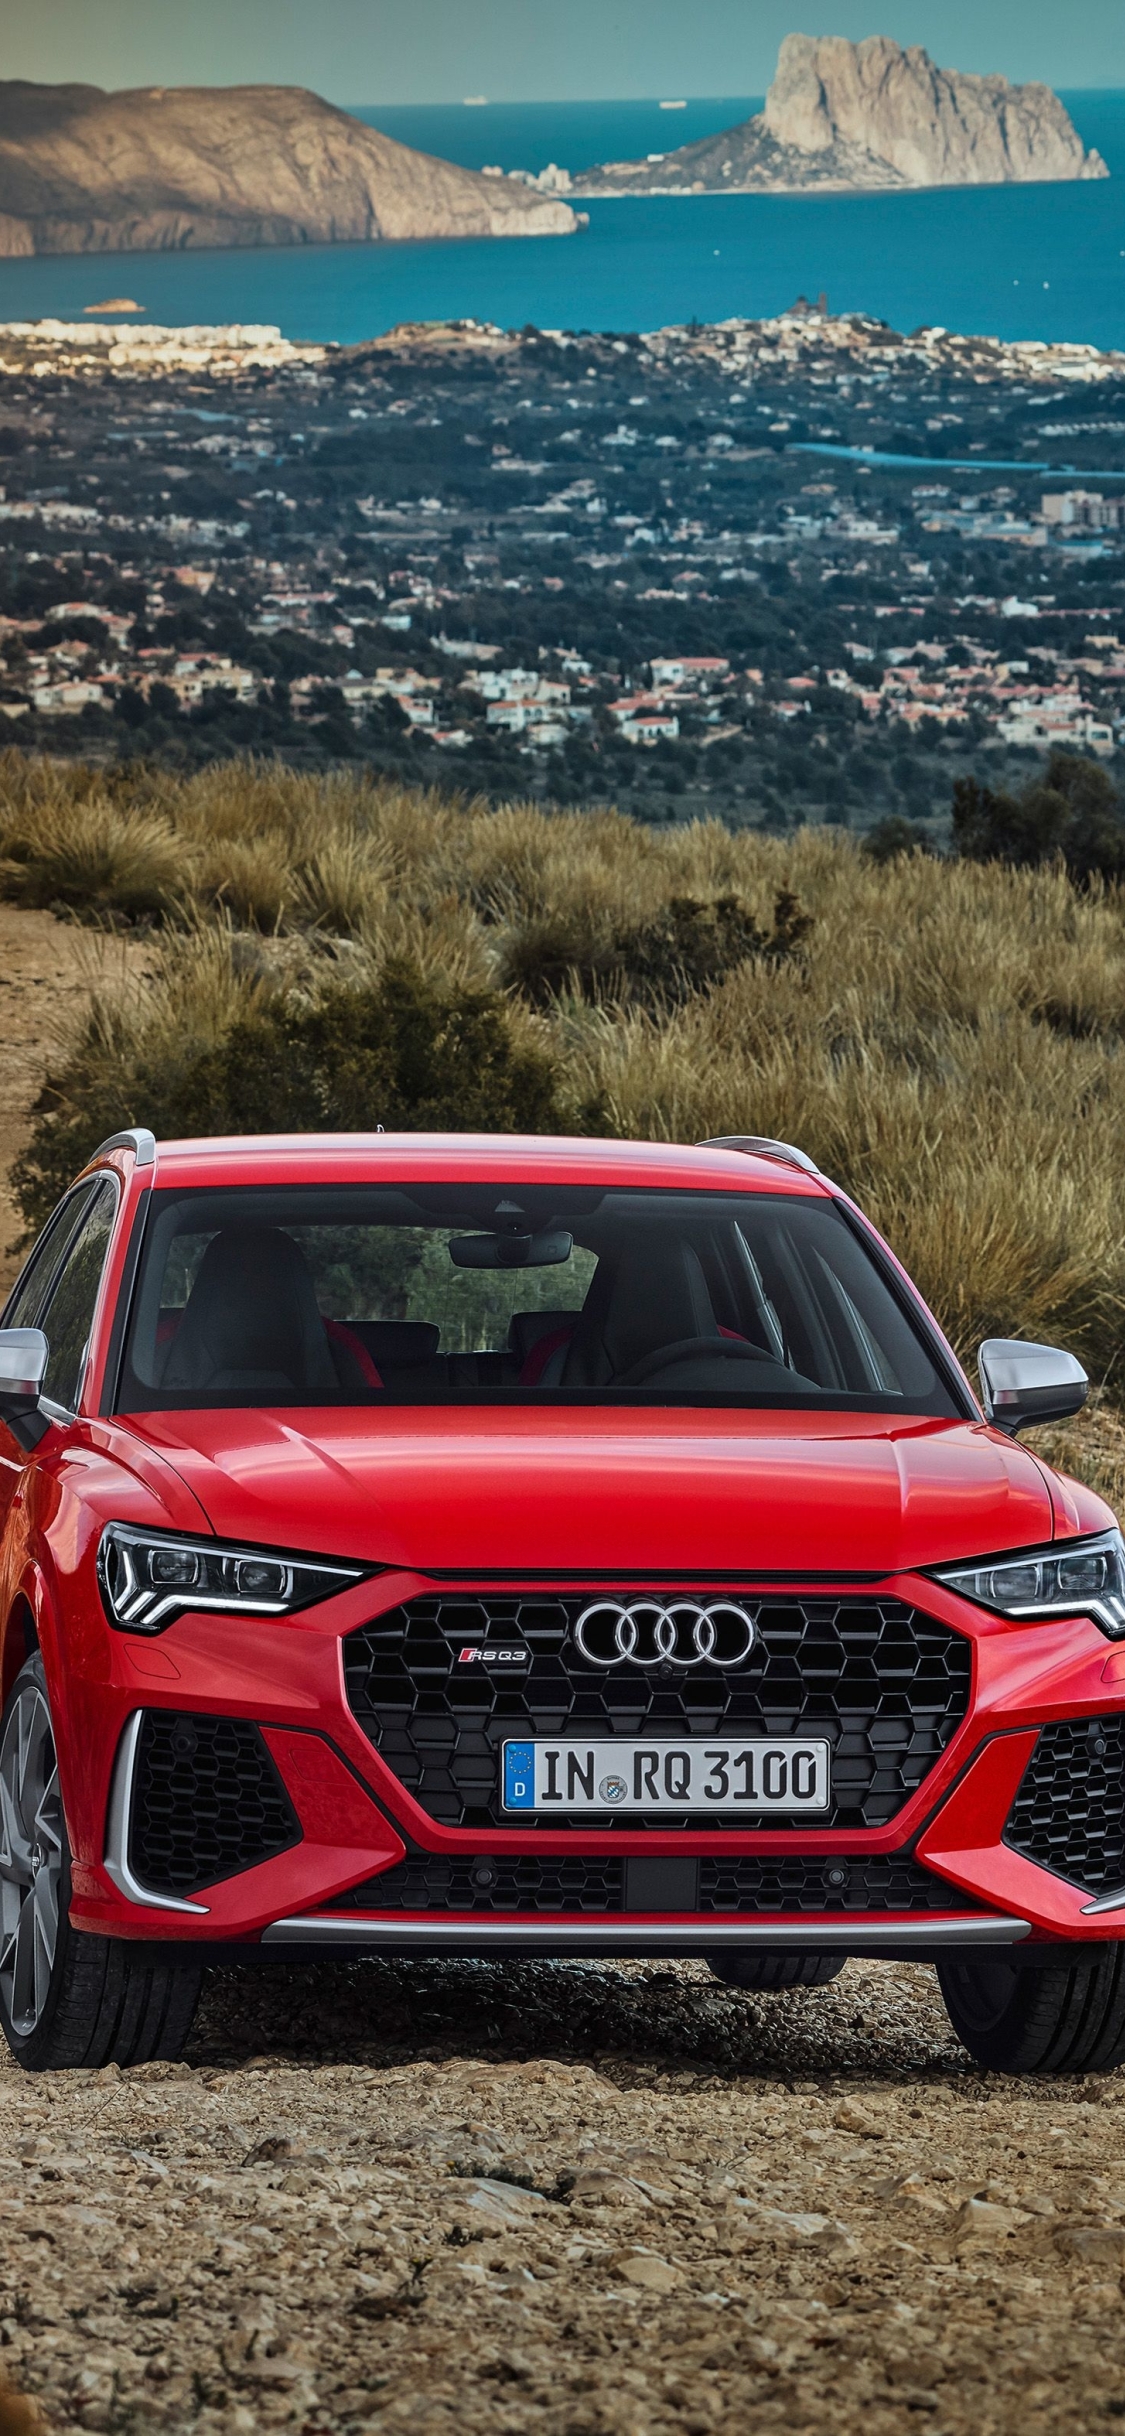 Audi Hd Wallpapers For Iphone X